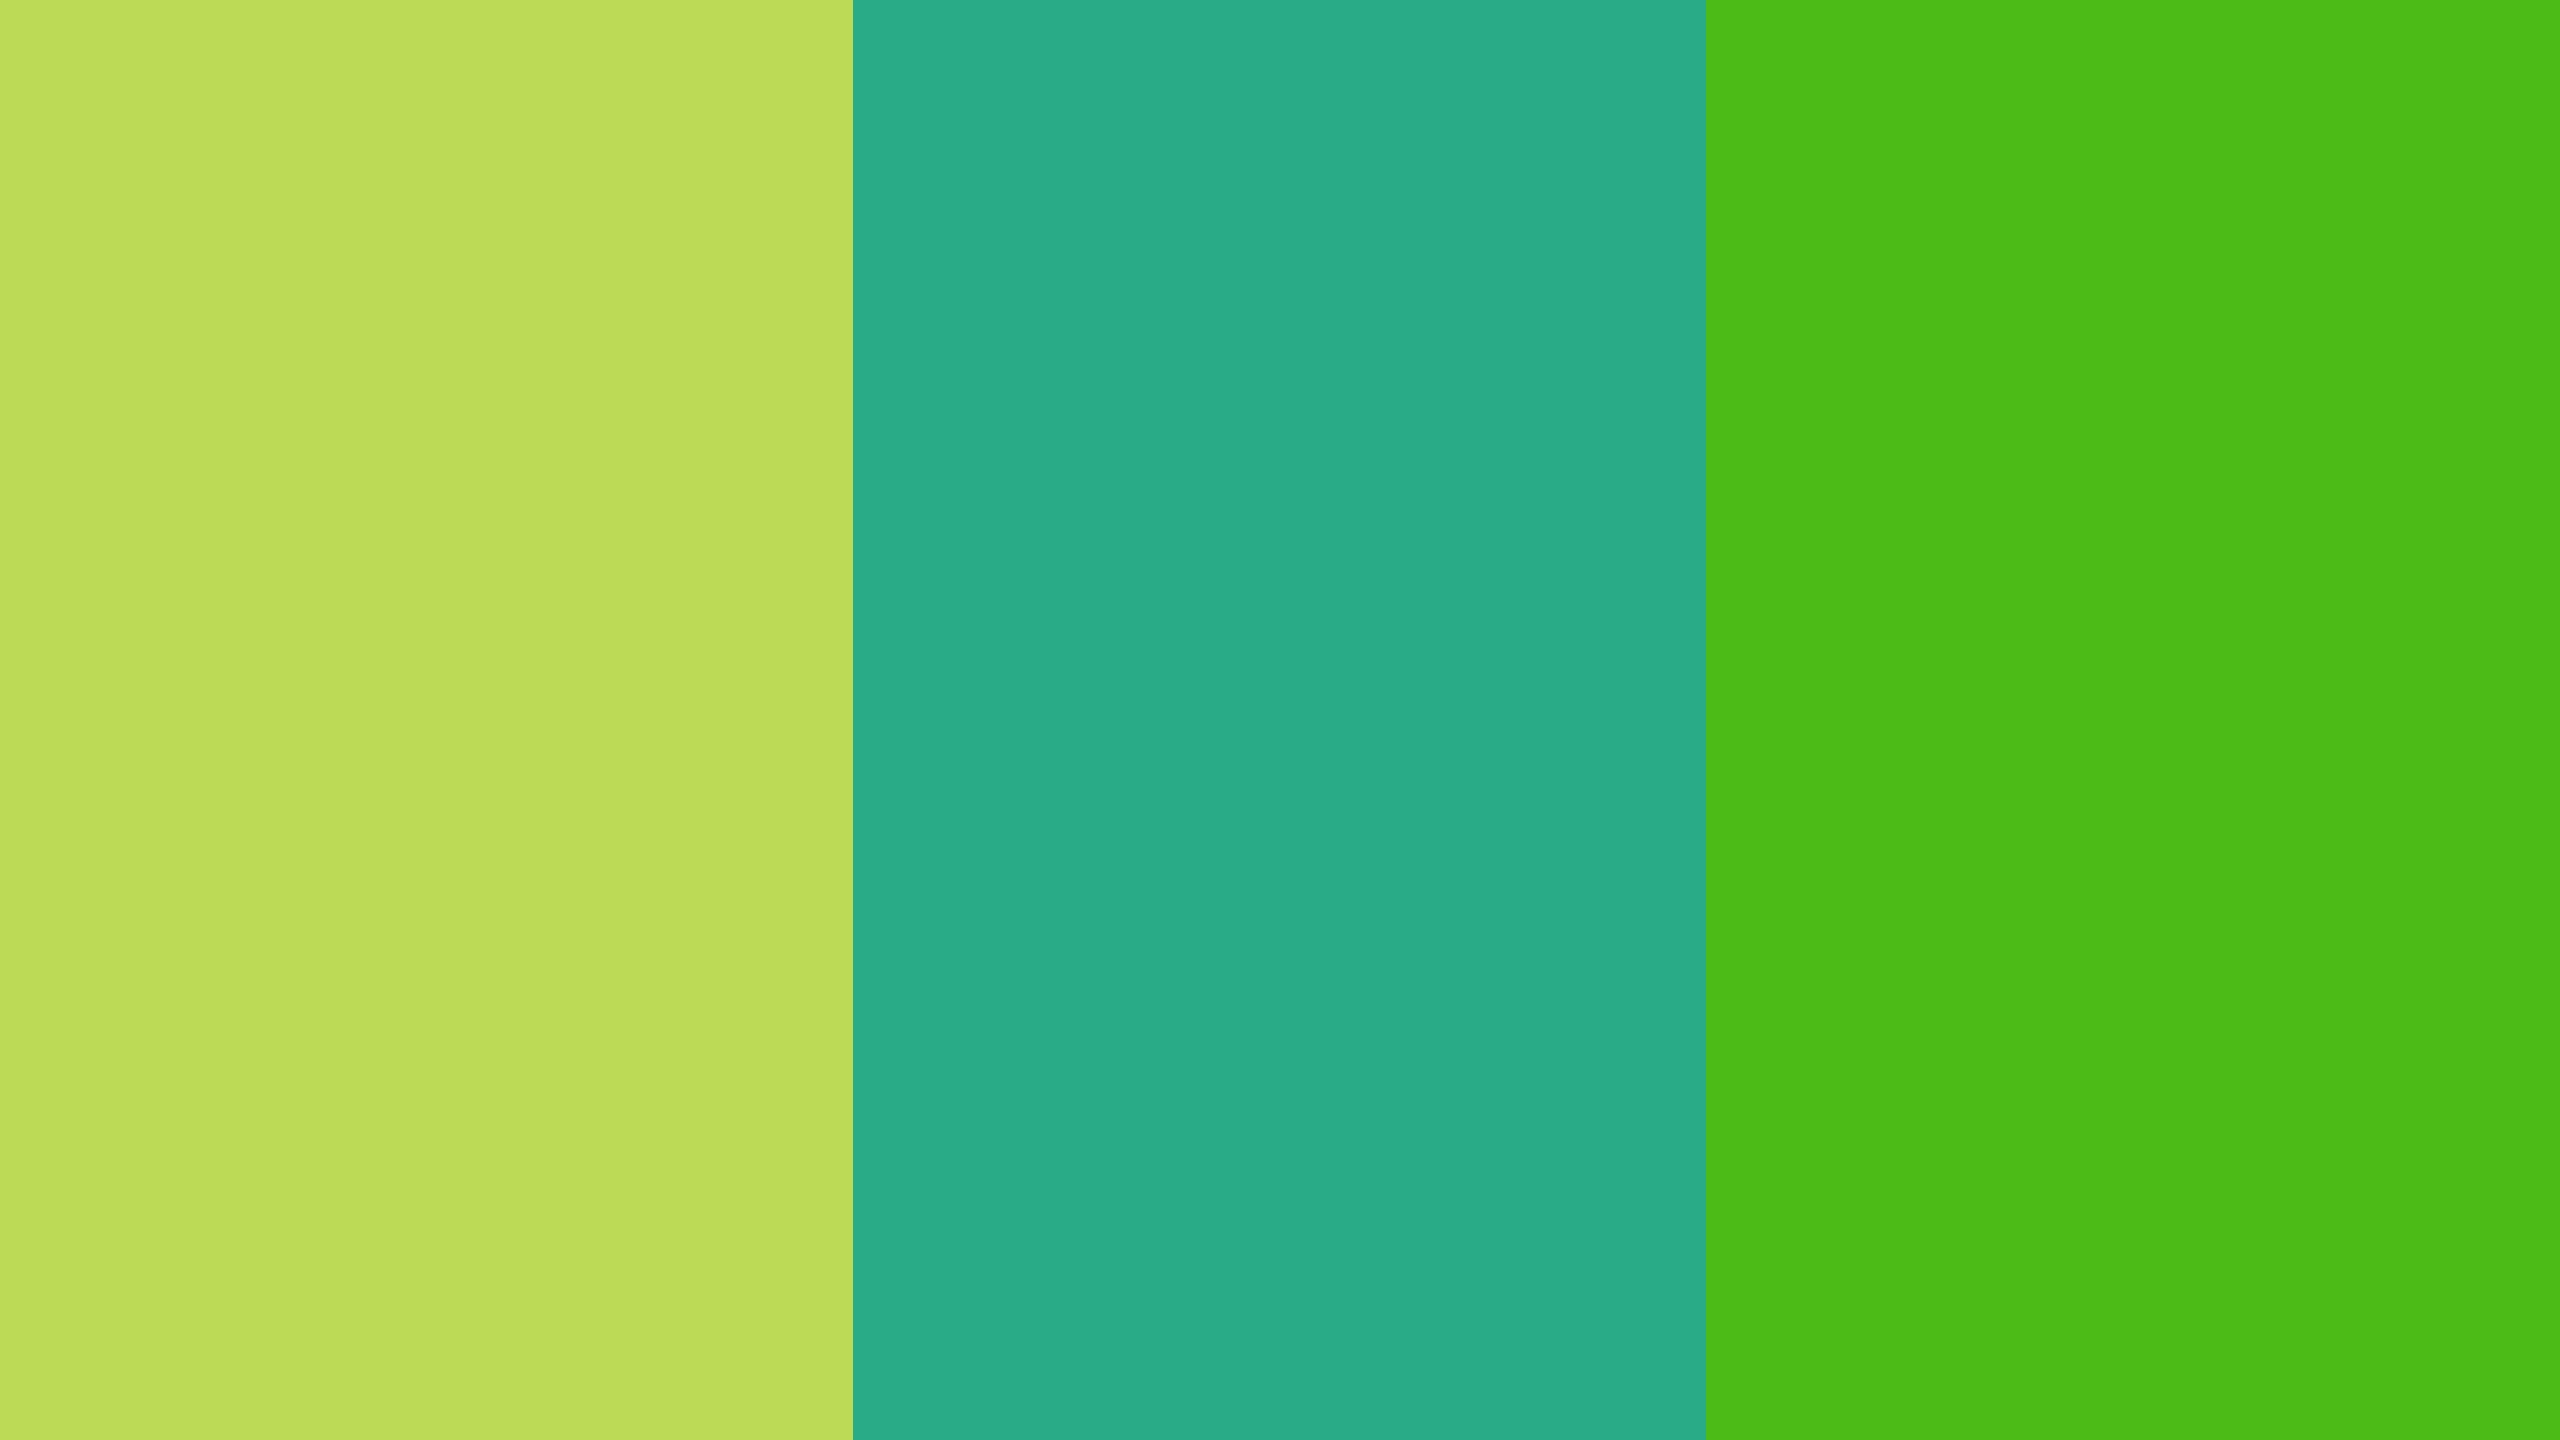 Free 2560x1440 resolution June Bud Jungle Green and Kelly Green solid